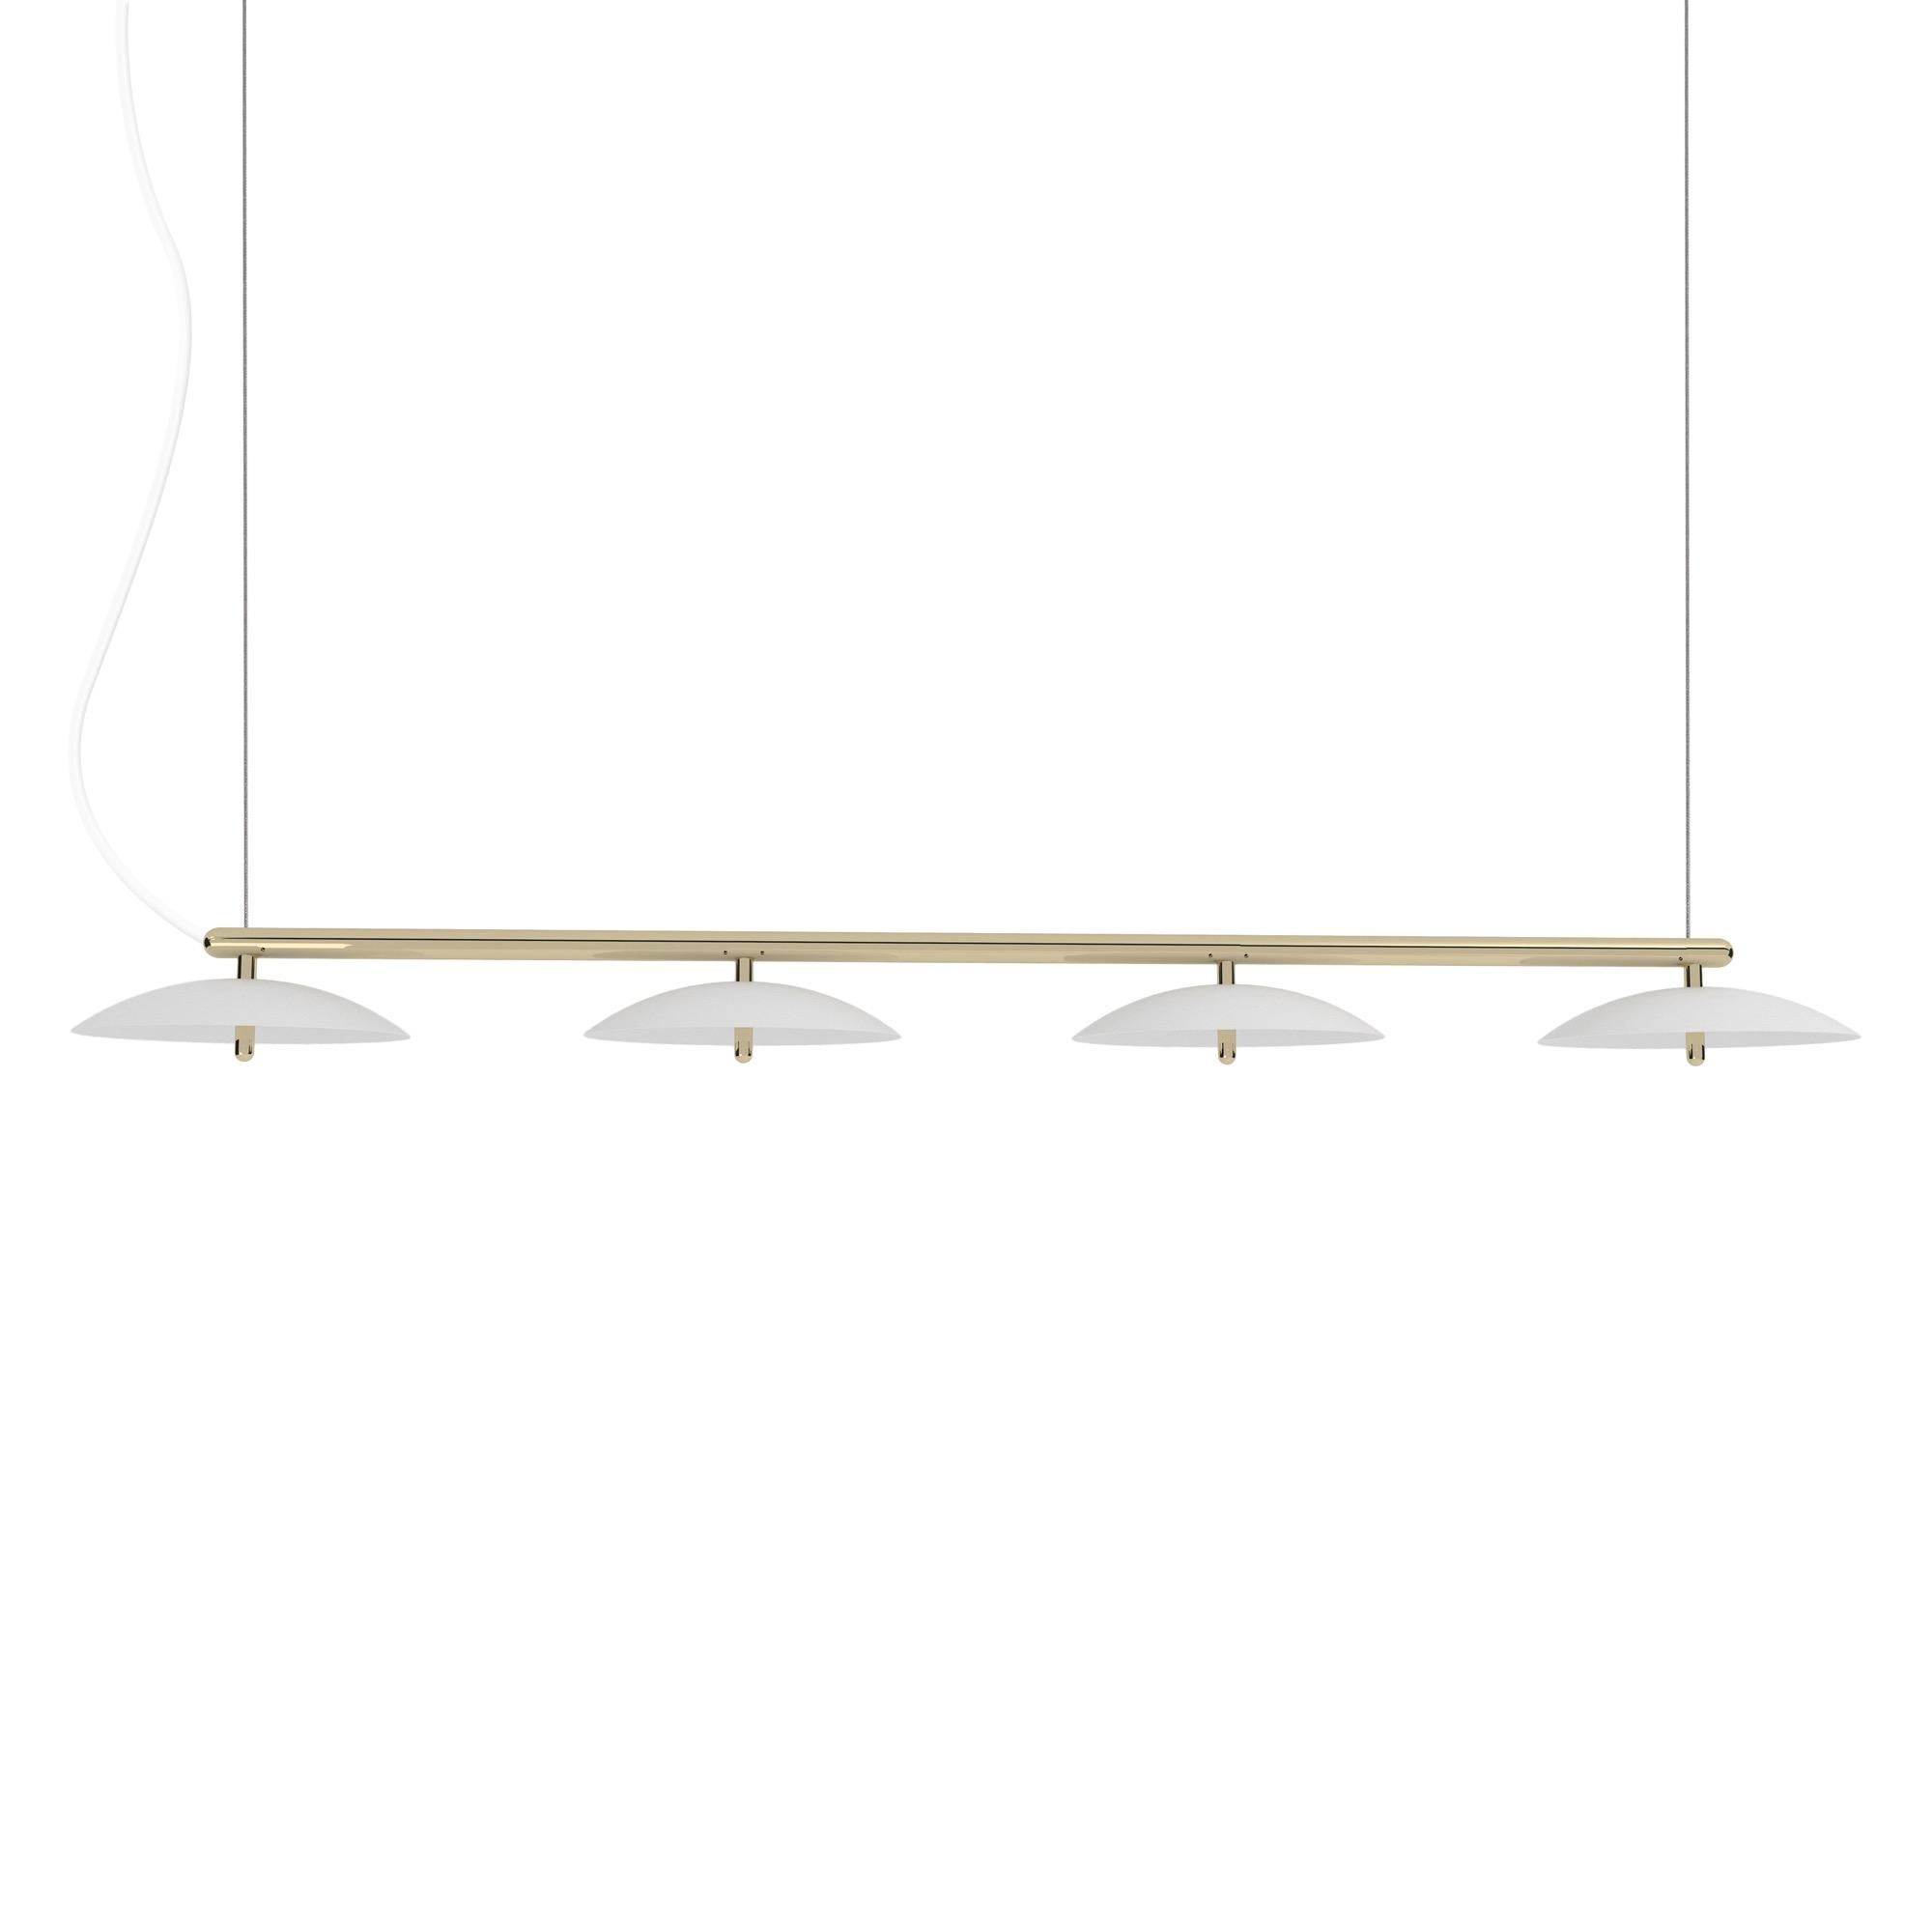 American Signal Linear Pendant, by Souda, Long, White & Copper, Made to Order For Sale